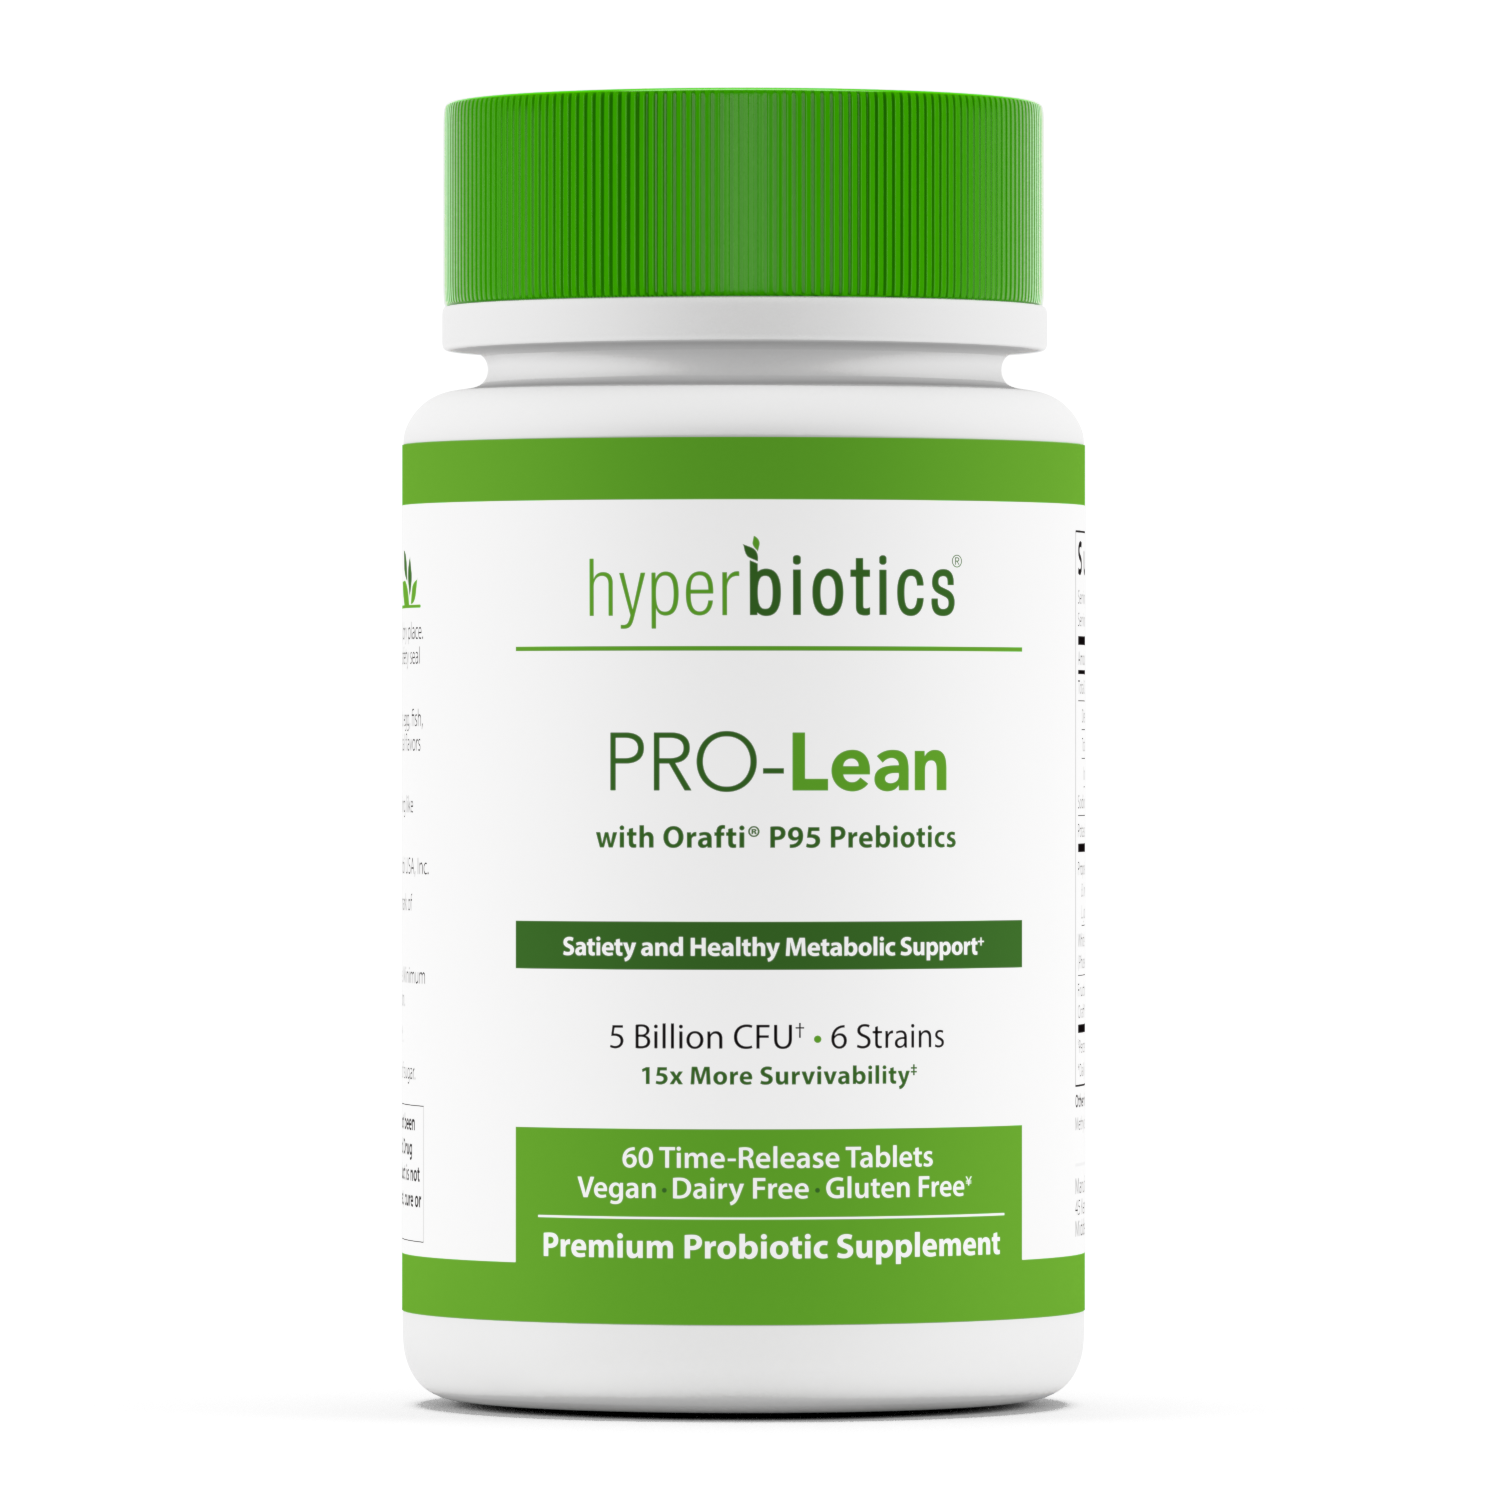 Hyperbiotics PRO-Lean: Satiety and Healthy Metabolic Support* Probiotic